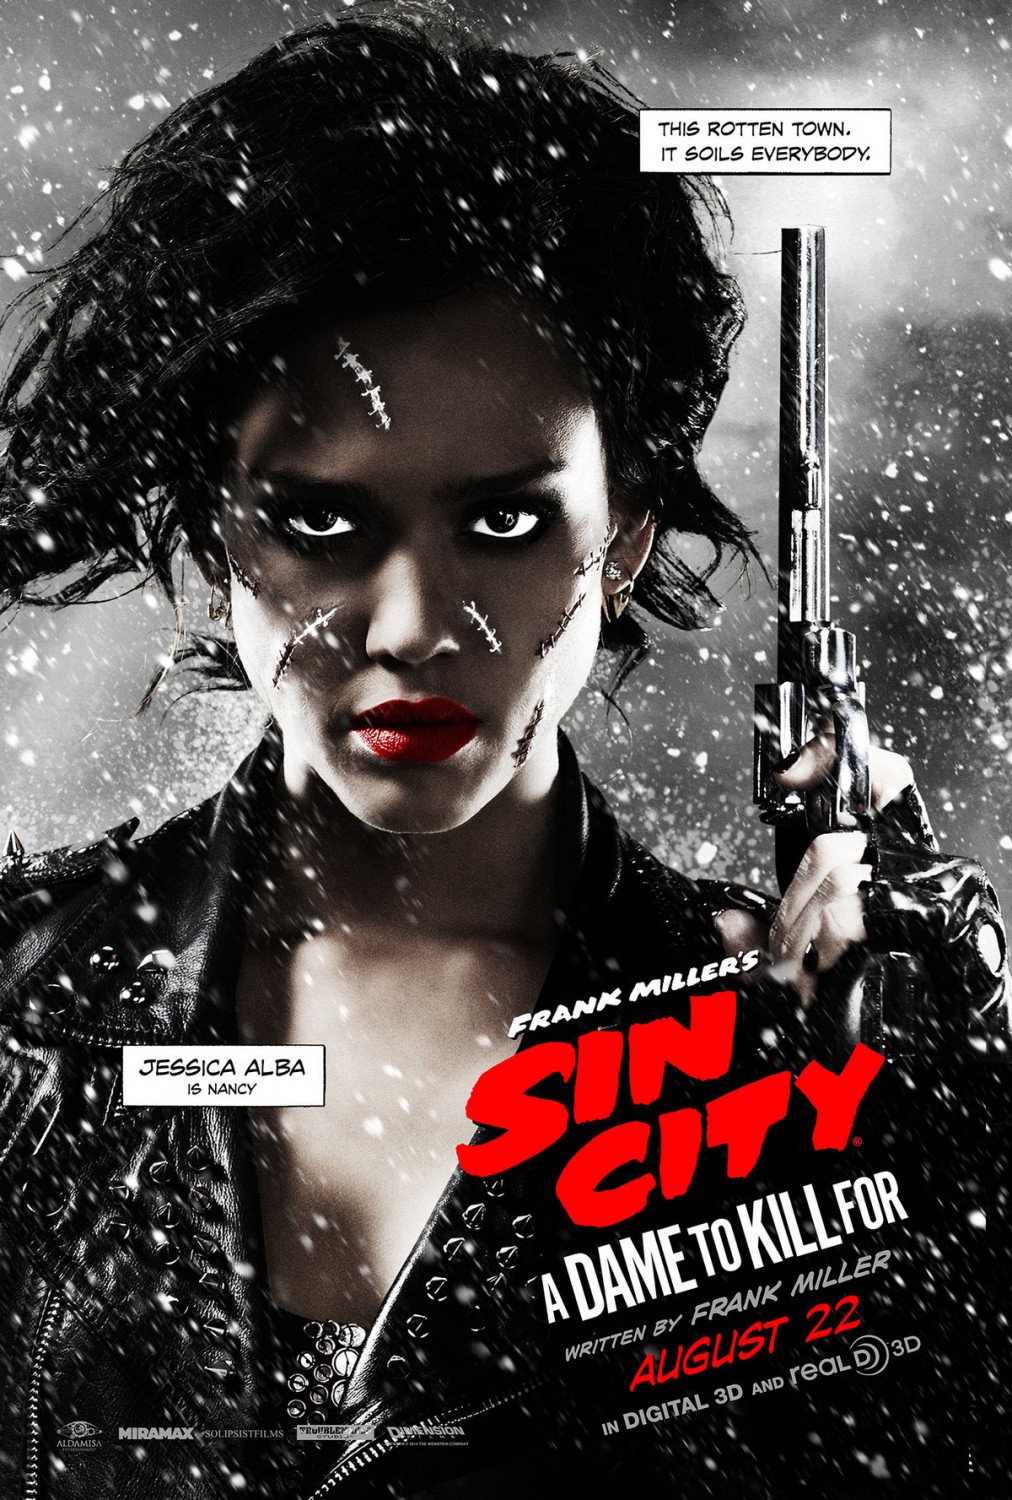 sin city movie posters